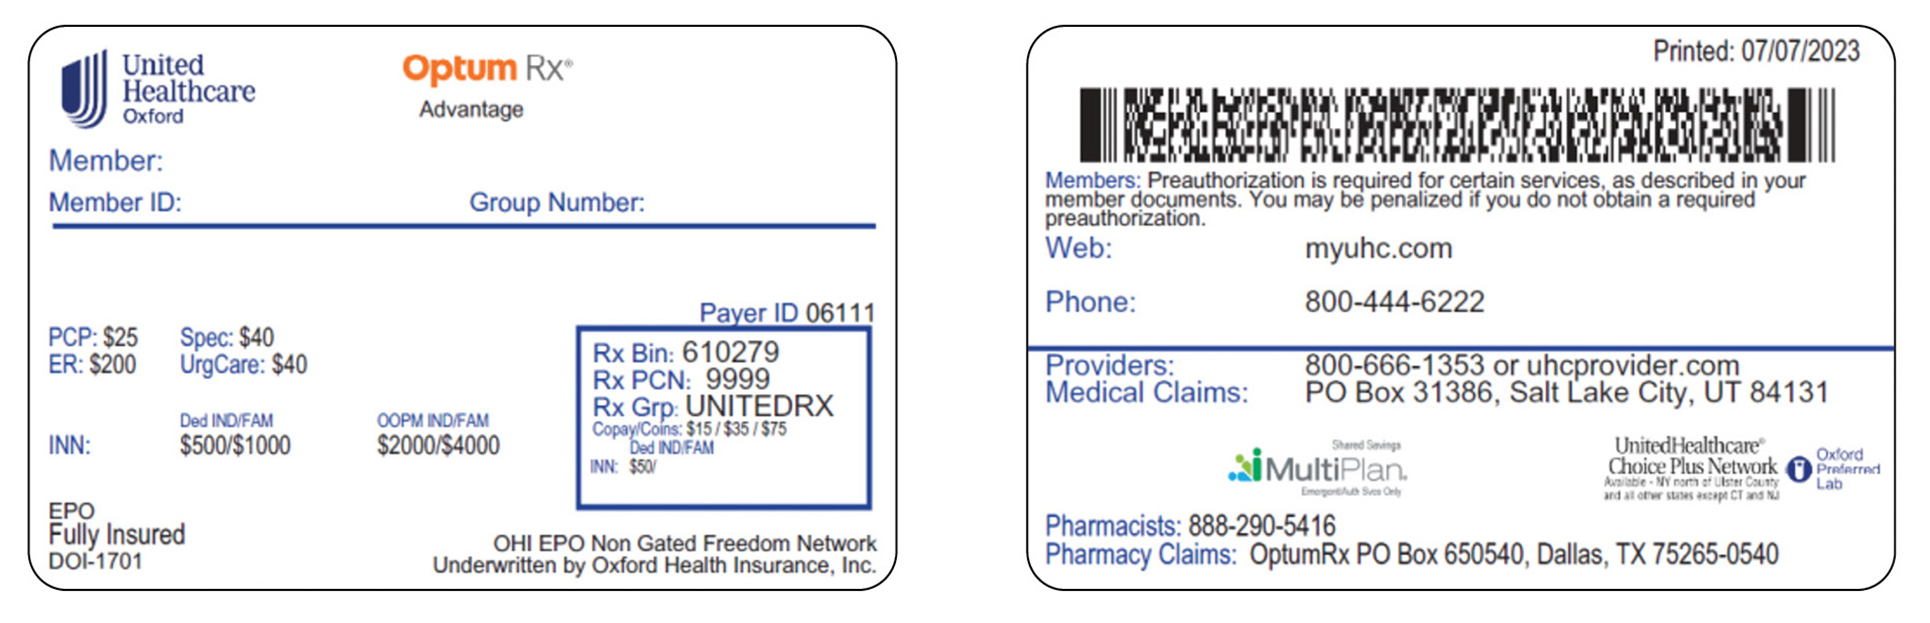 Image of front and back of a UnitedHealthcare Choice Plus Network card